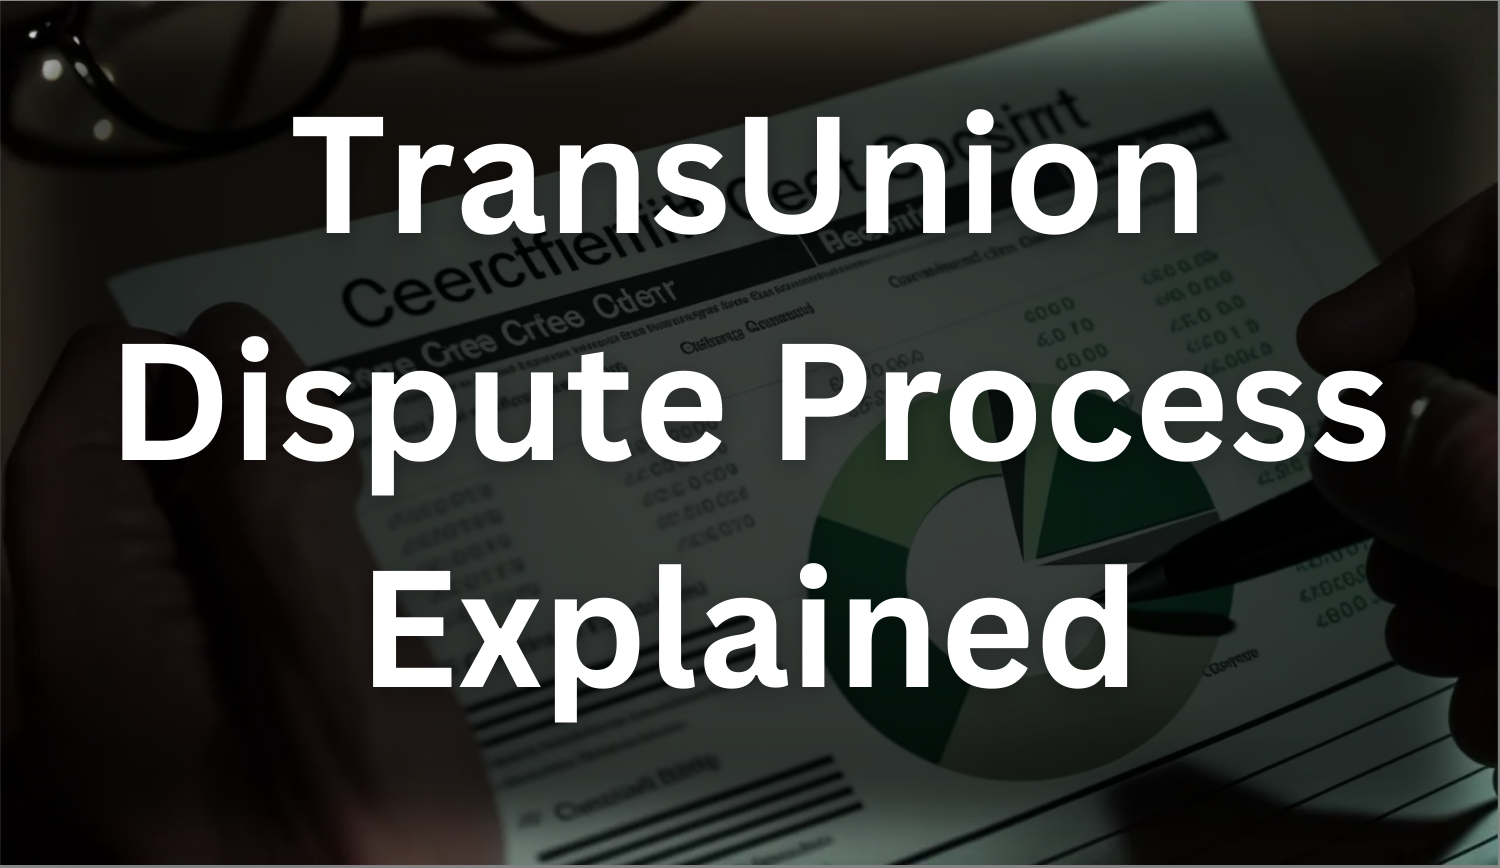 Do you know all you need to know about the TransUnion dispute process?